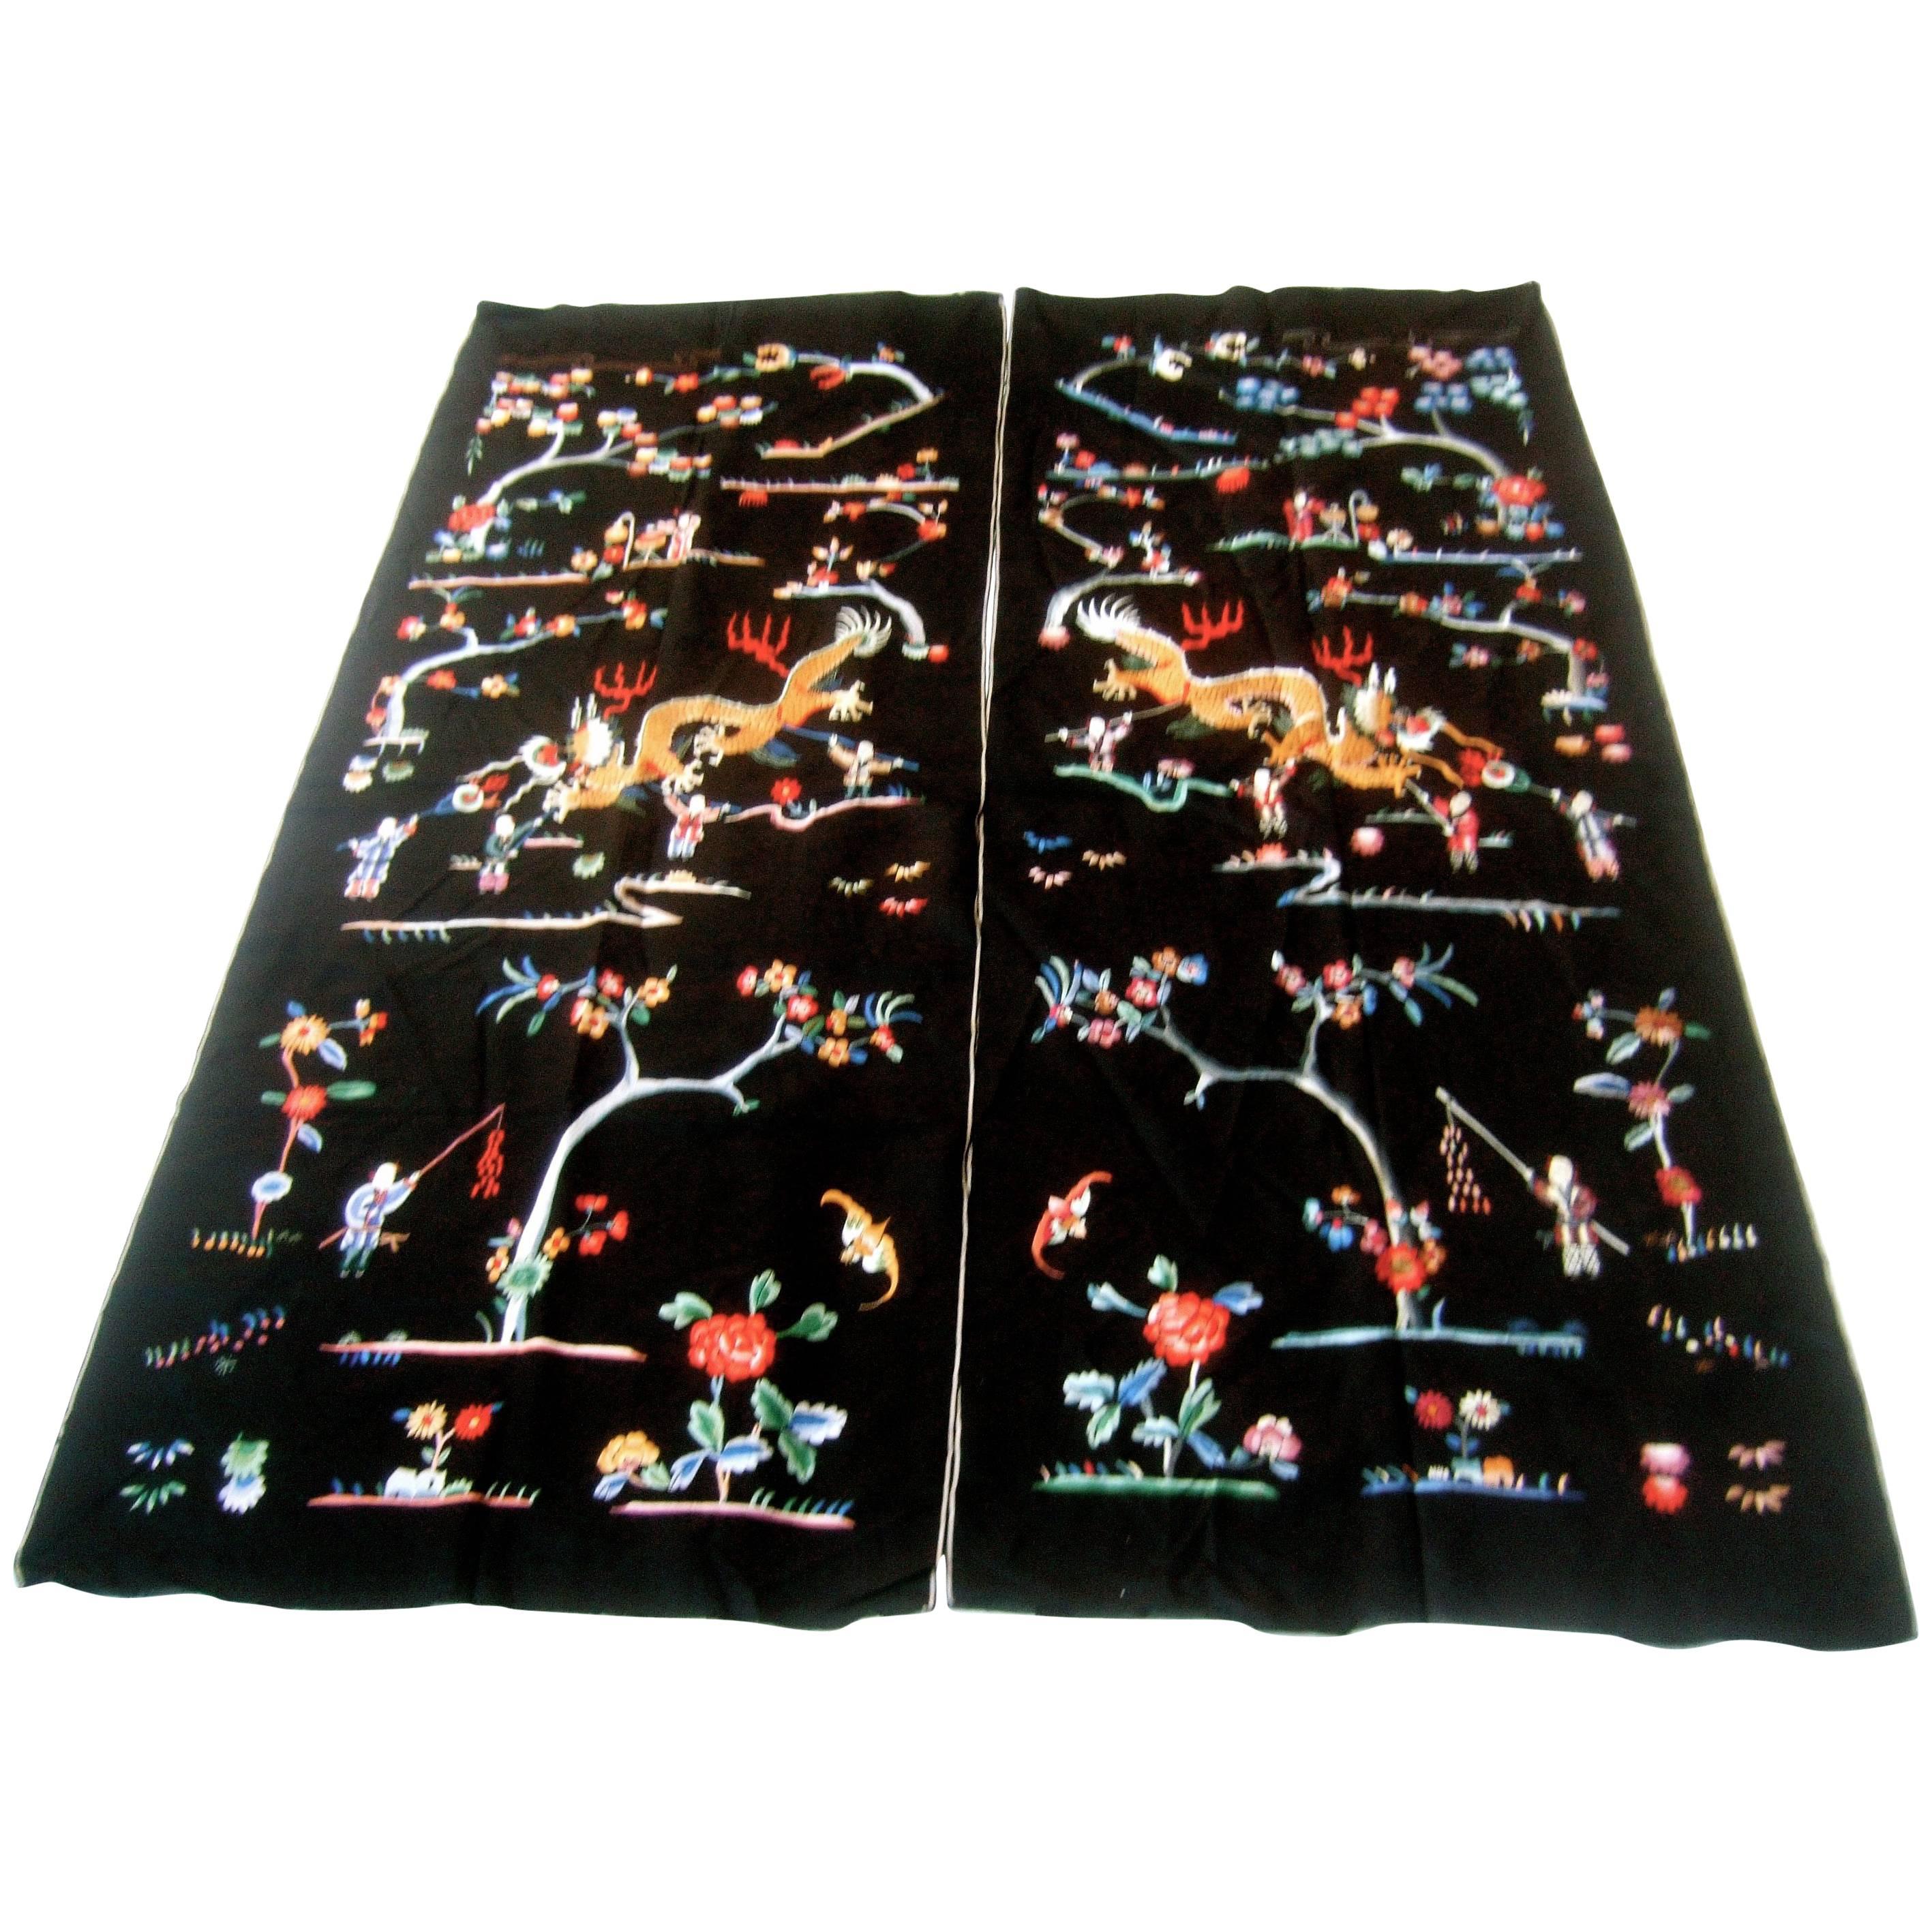 Exotic Embroidered Asian Theme Pair of Satin Fabric Panels c 1970s 